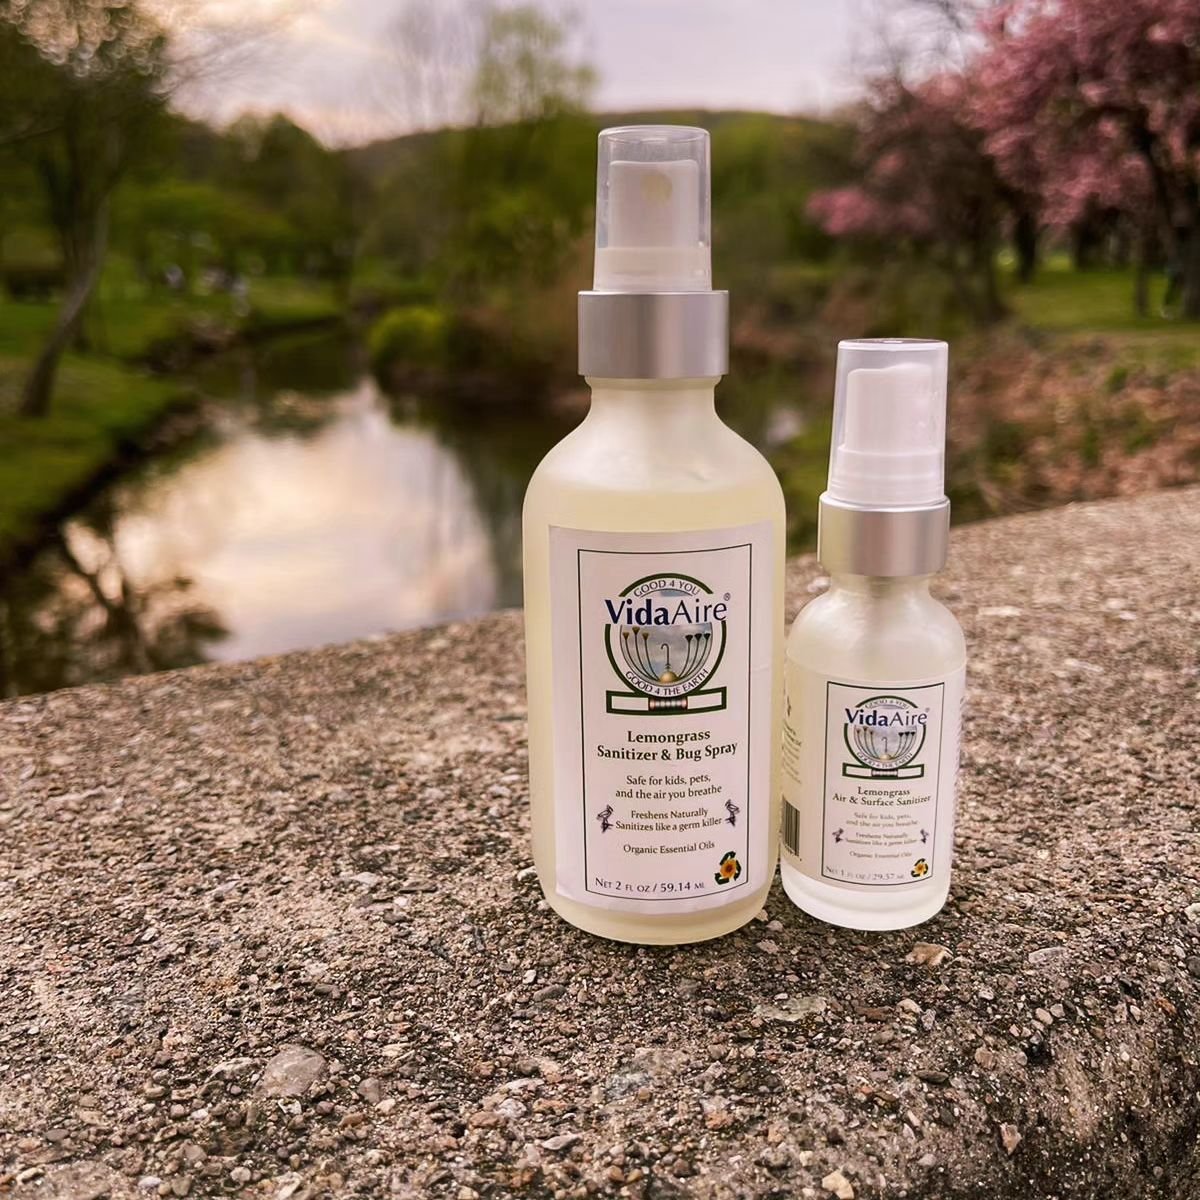 Such a beautiful day with VidaAire ☀️🌸
.
.
.
Buy VidaAire Lemongrass Sanitizer and Bug Spray at
https://www.vidaaire.com/
⚠️12% April Discount Ending Soon!⚠️
#nature #freshair #VidaAire